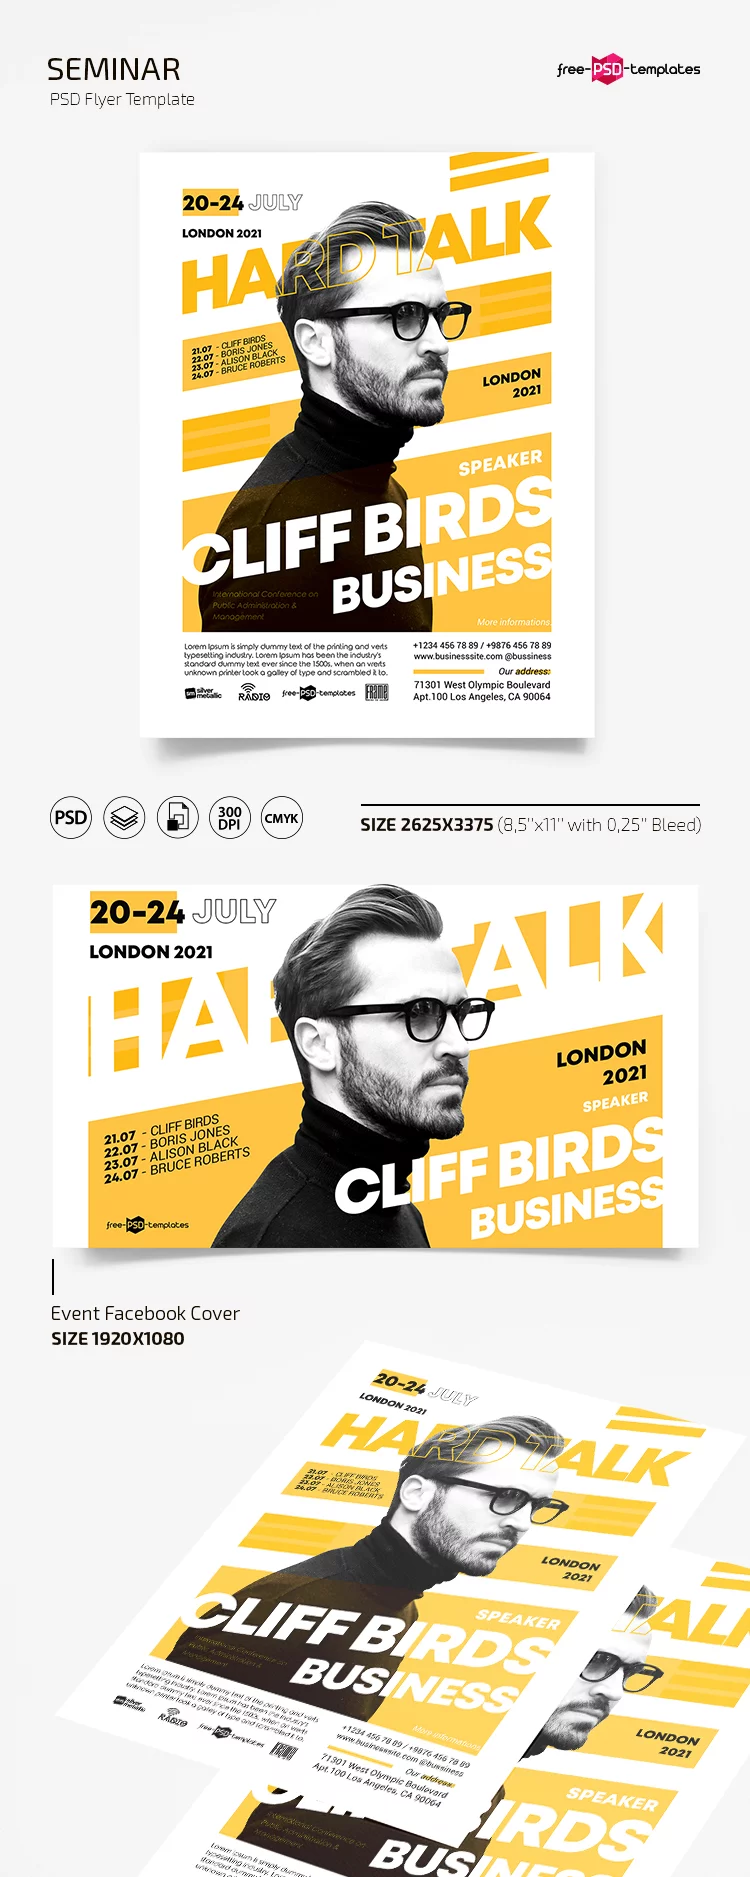 Free Seminar Flyer Template in PSD